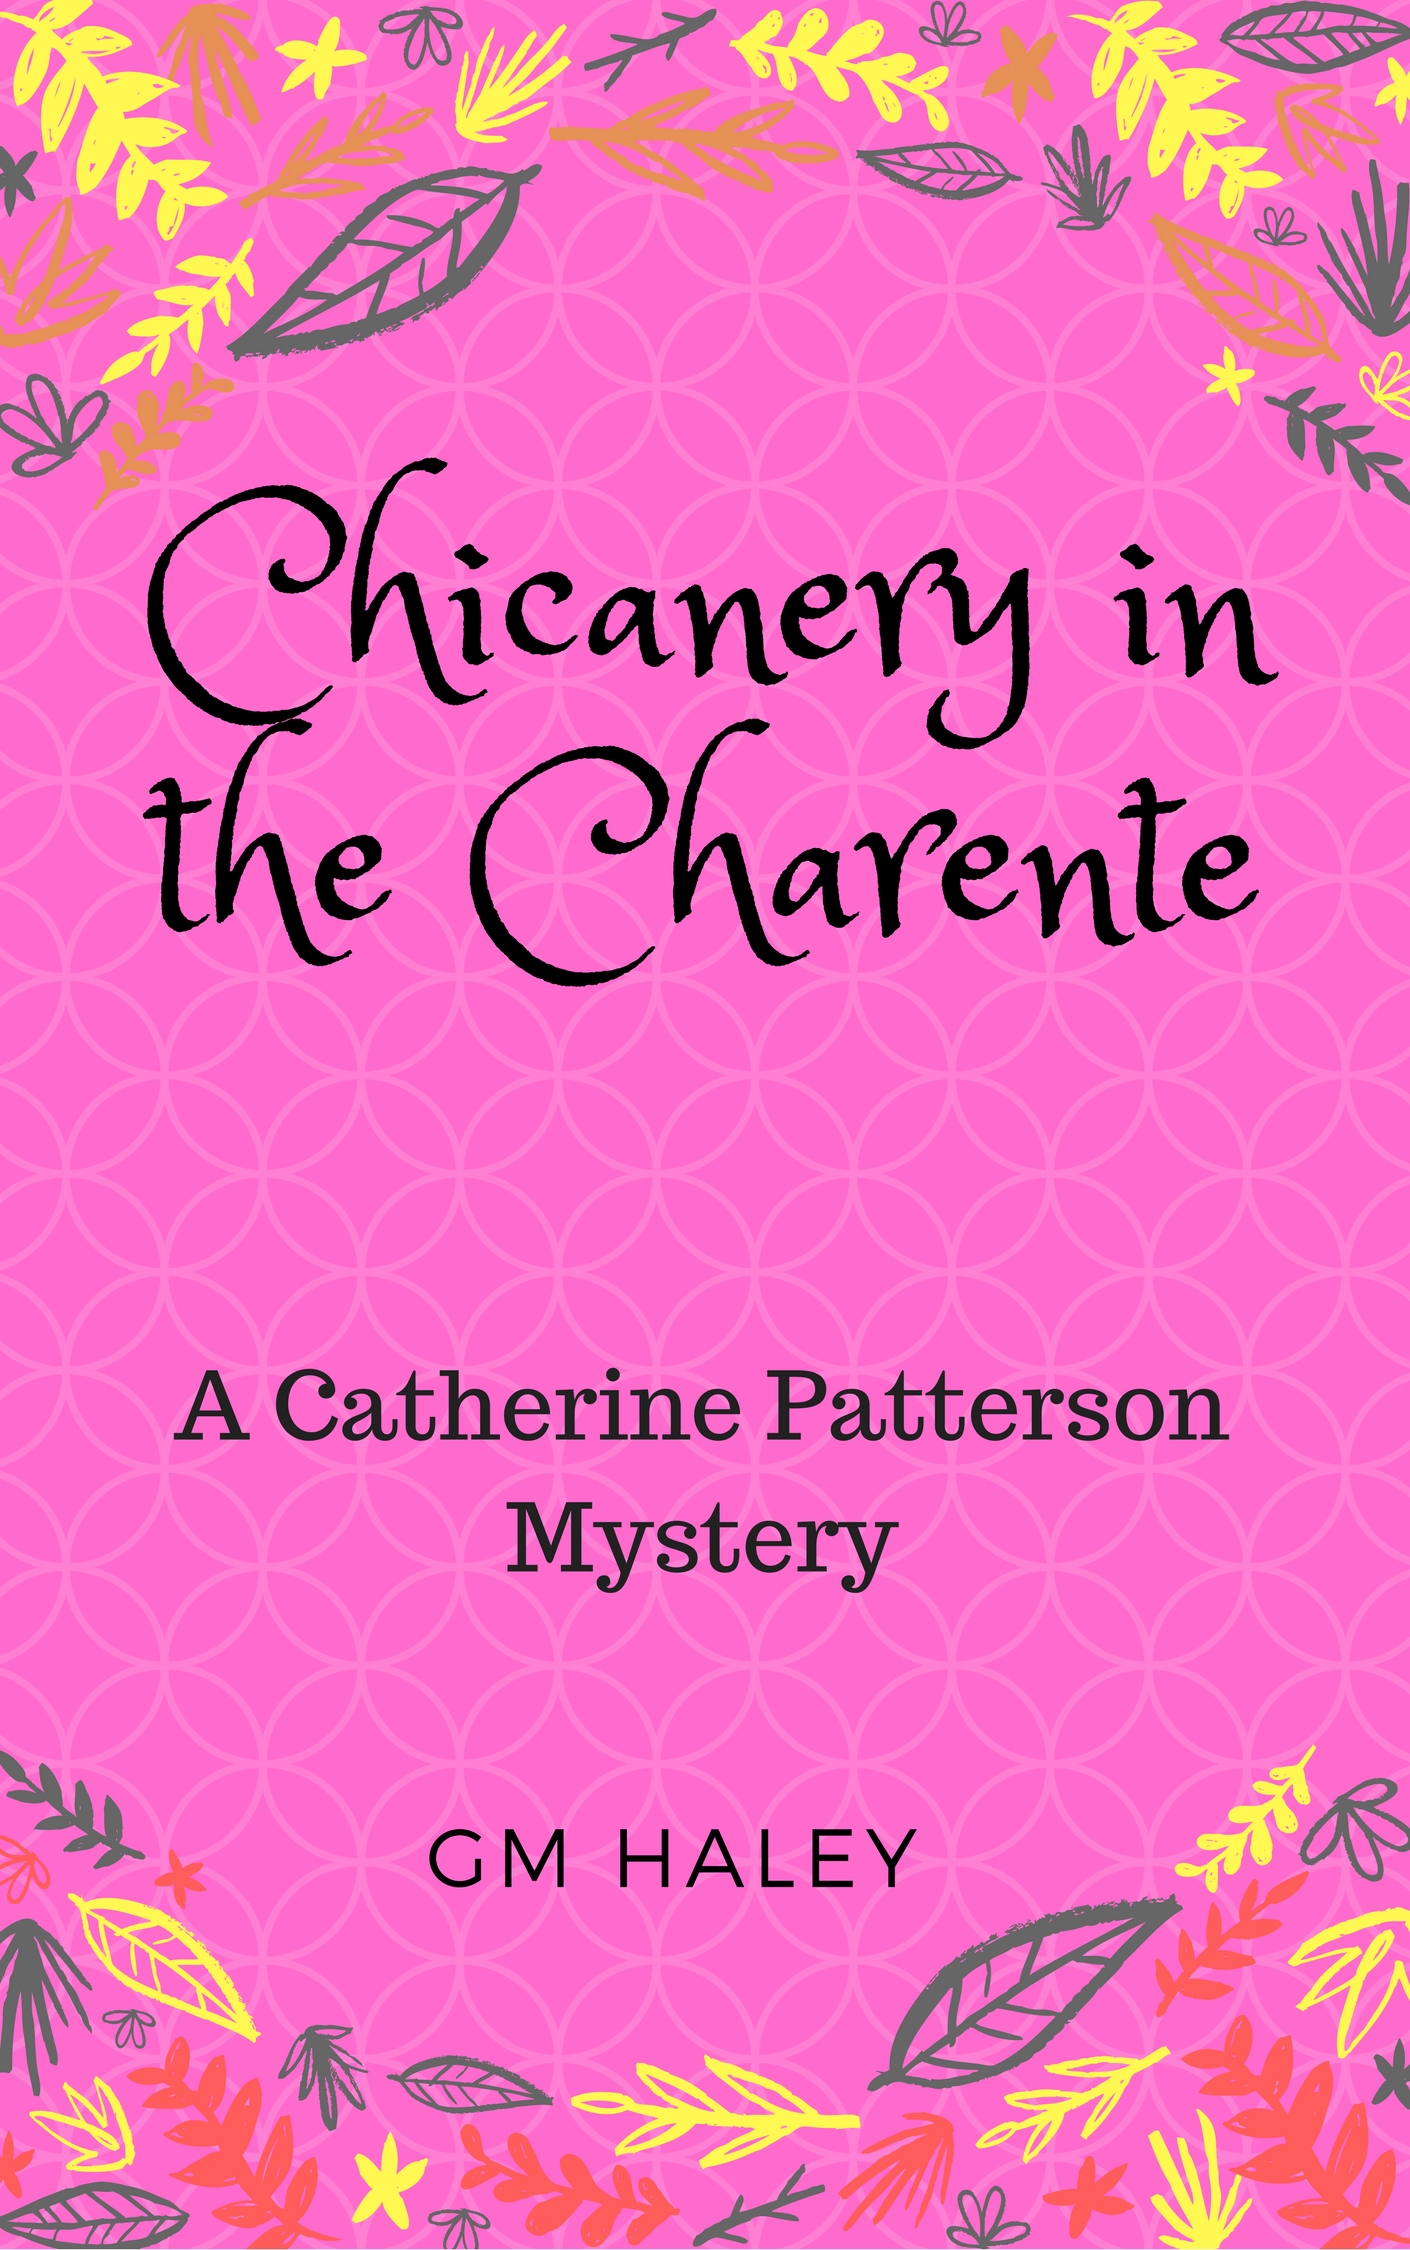 FREE: Chicanery in the Charente by GM Haley